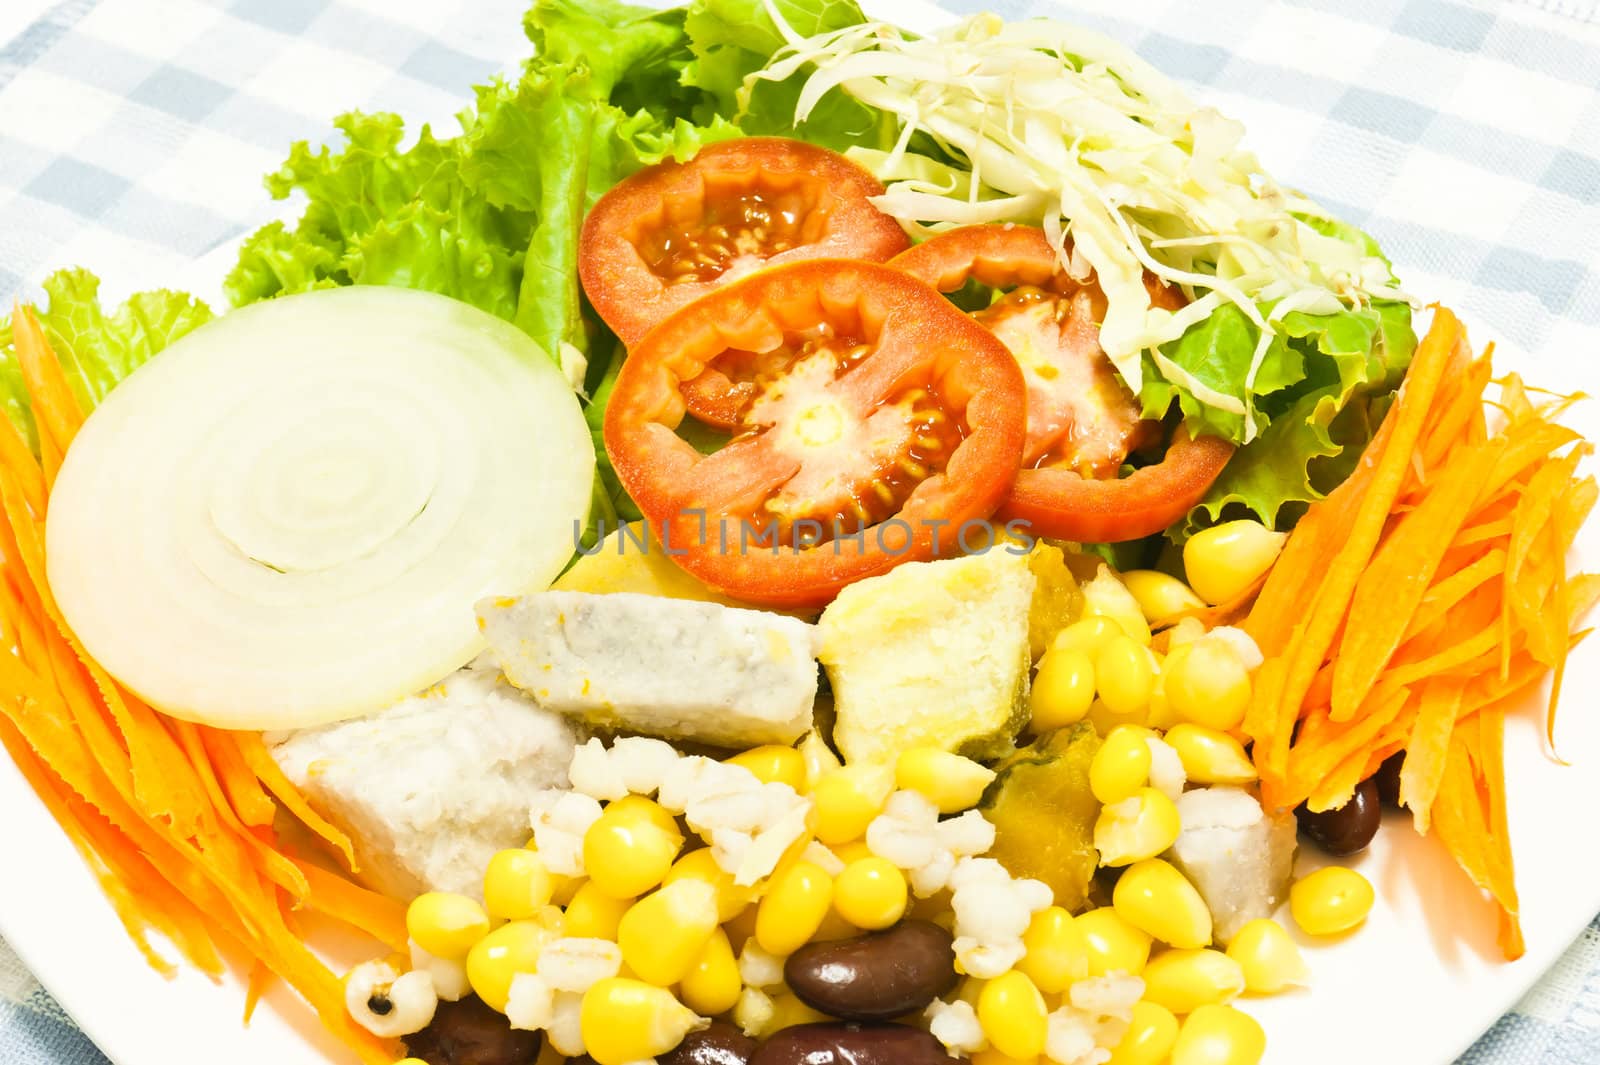 salad is the natural food for vegetarian